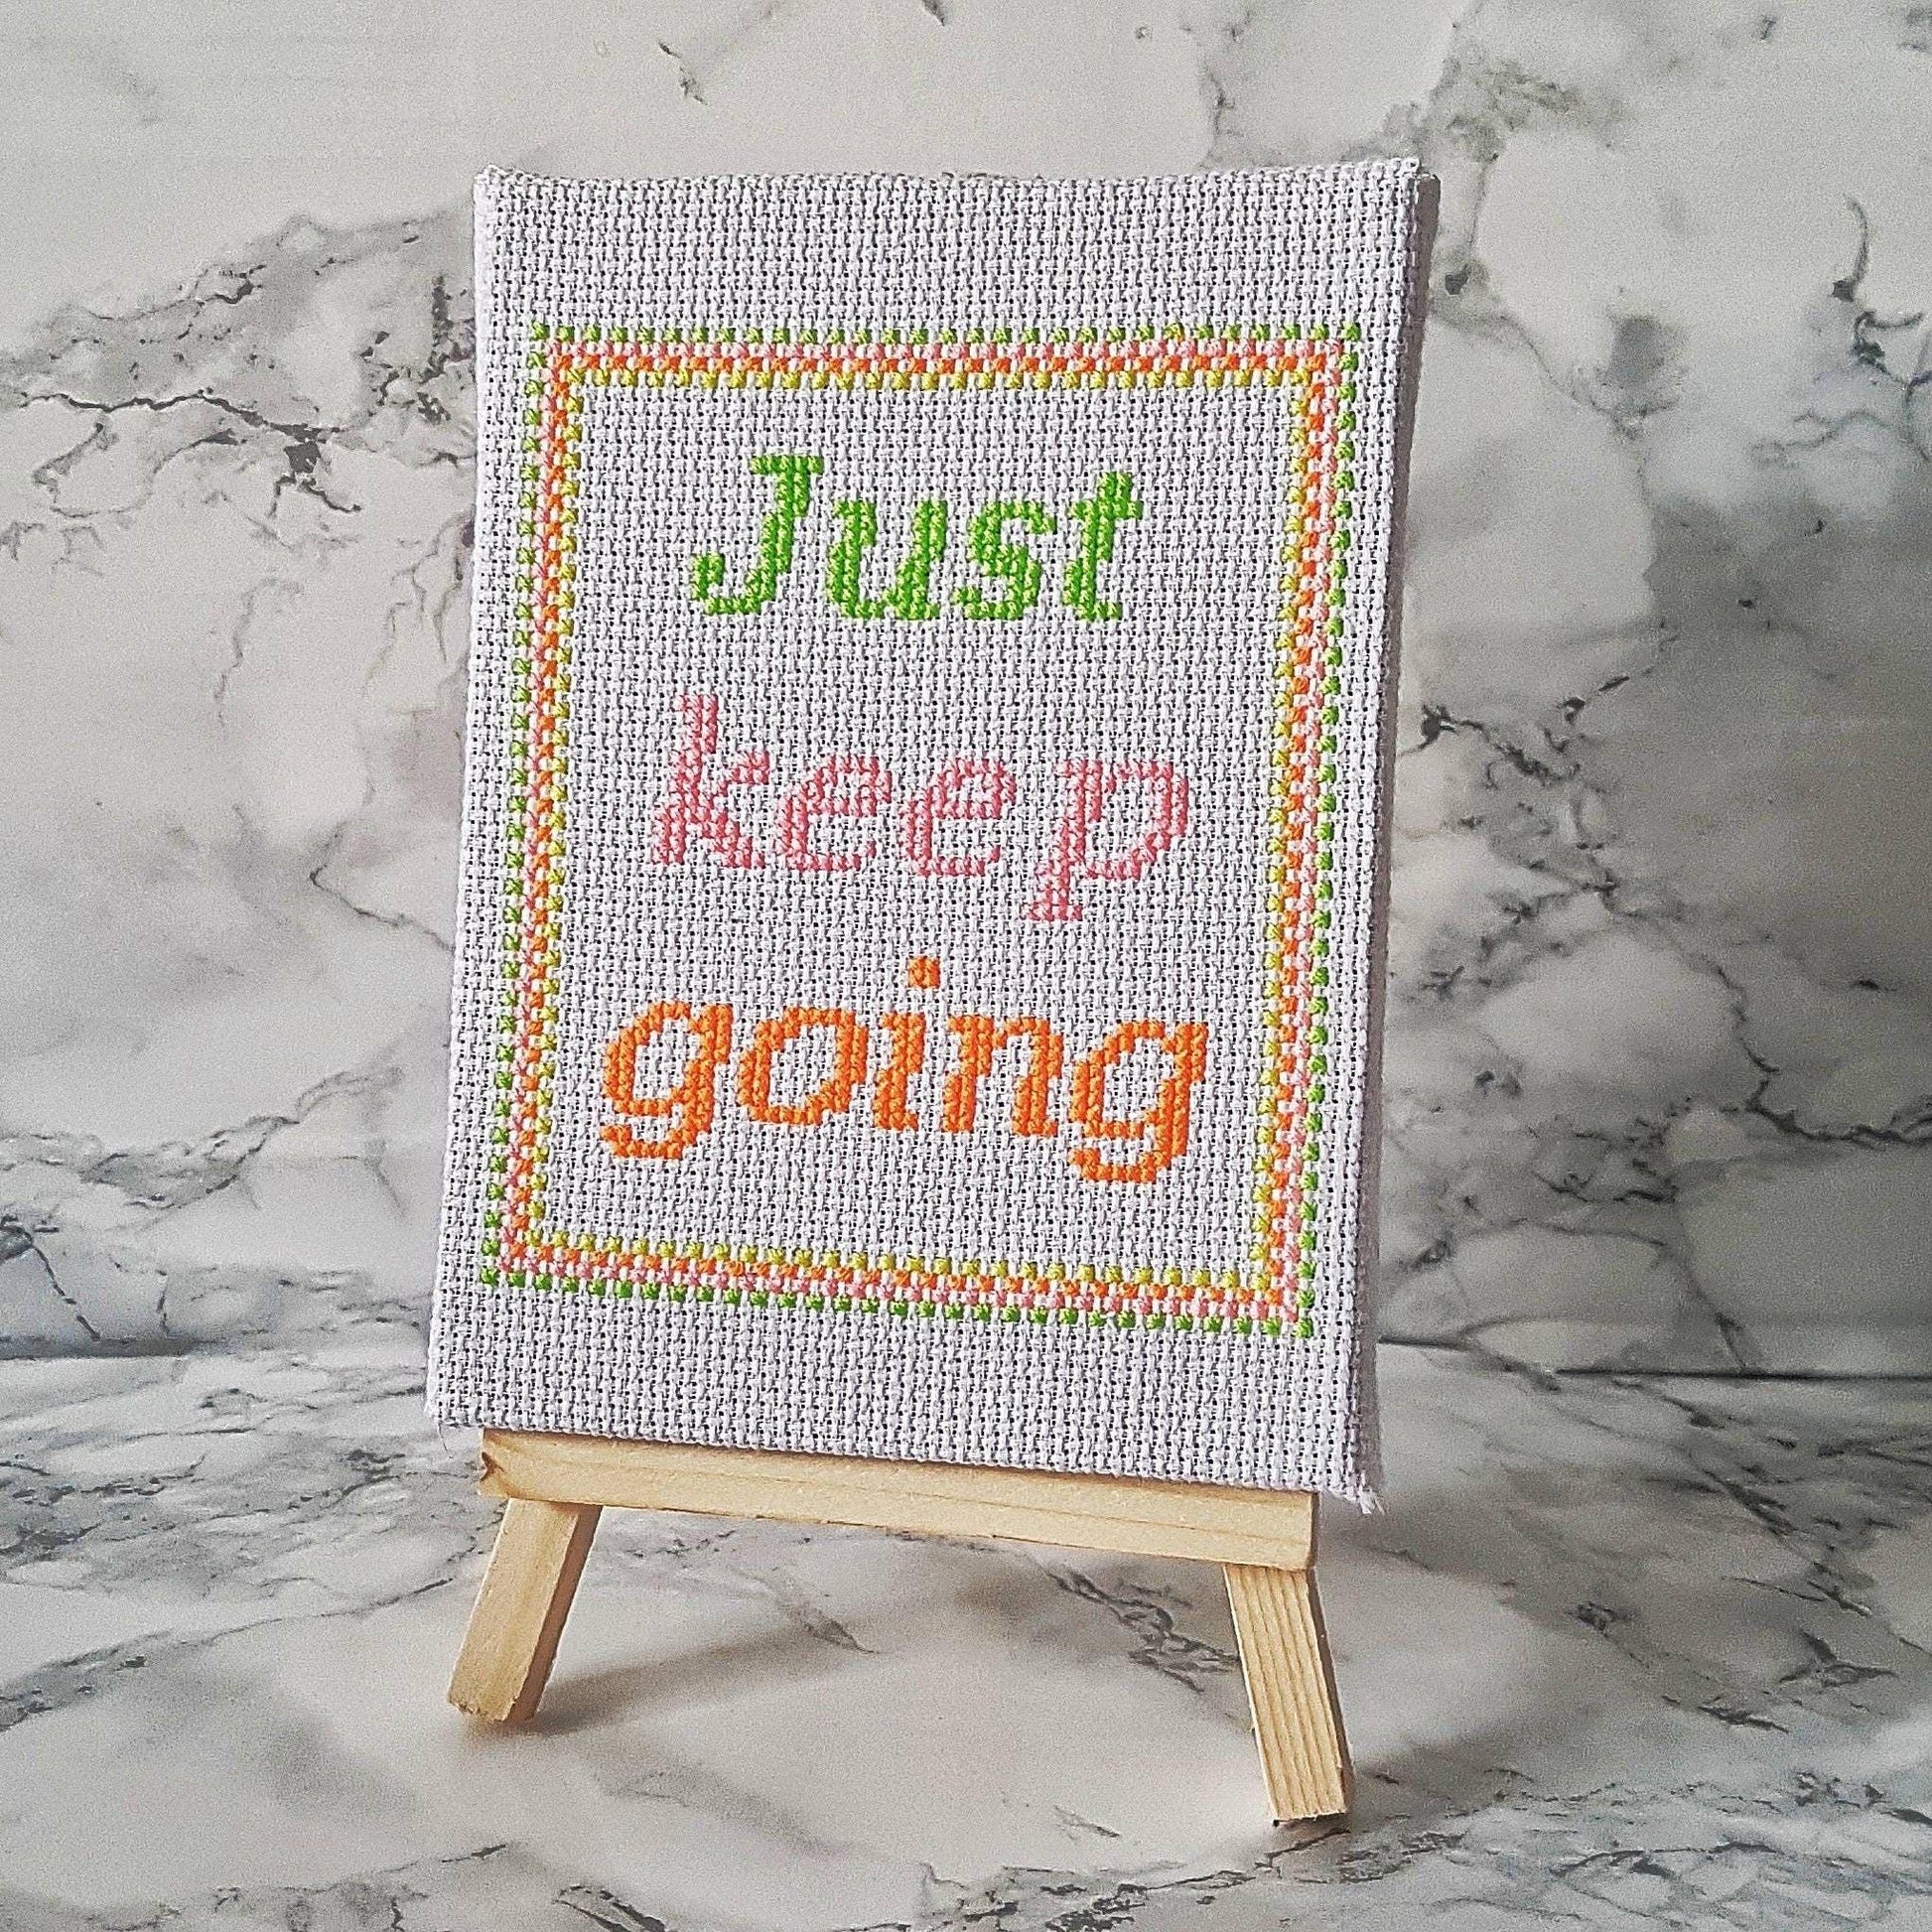 Just keep going, completed cross stitch quote - Thistleflat Crafts